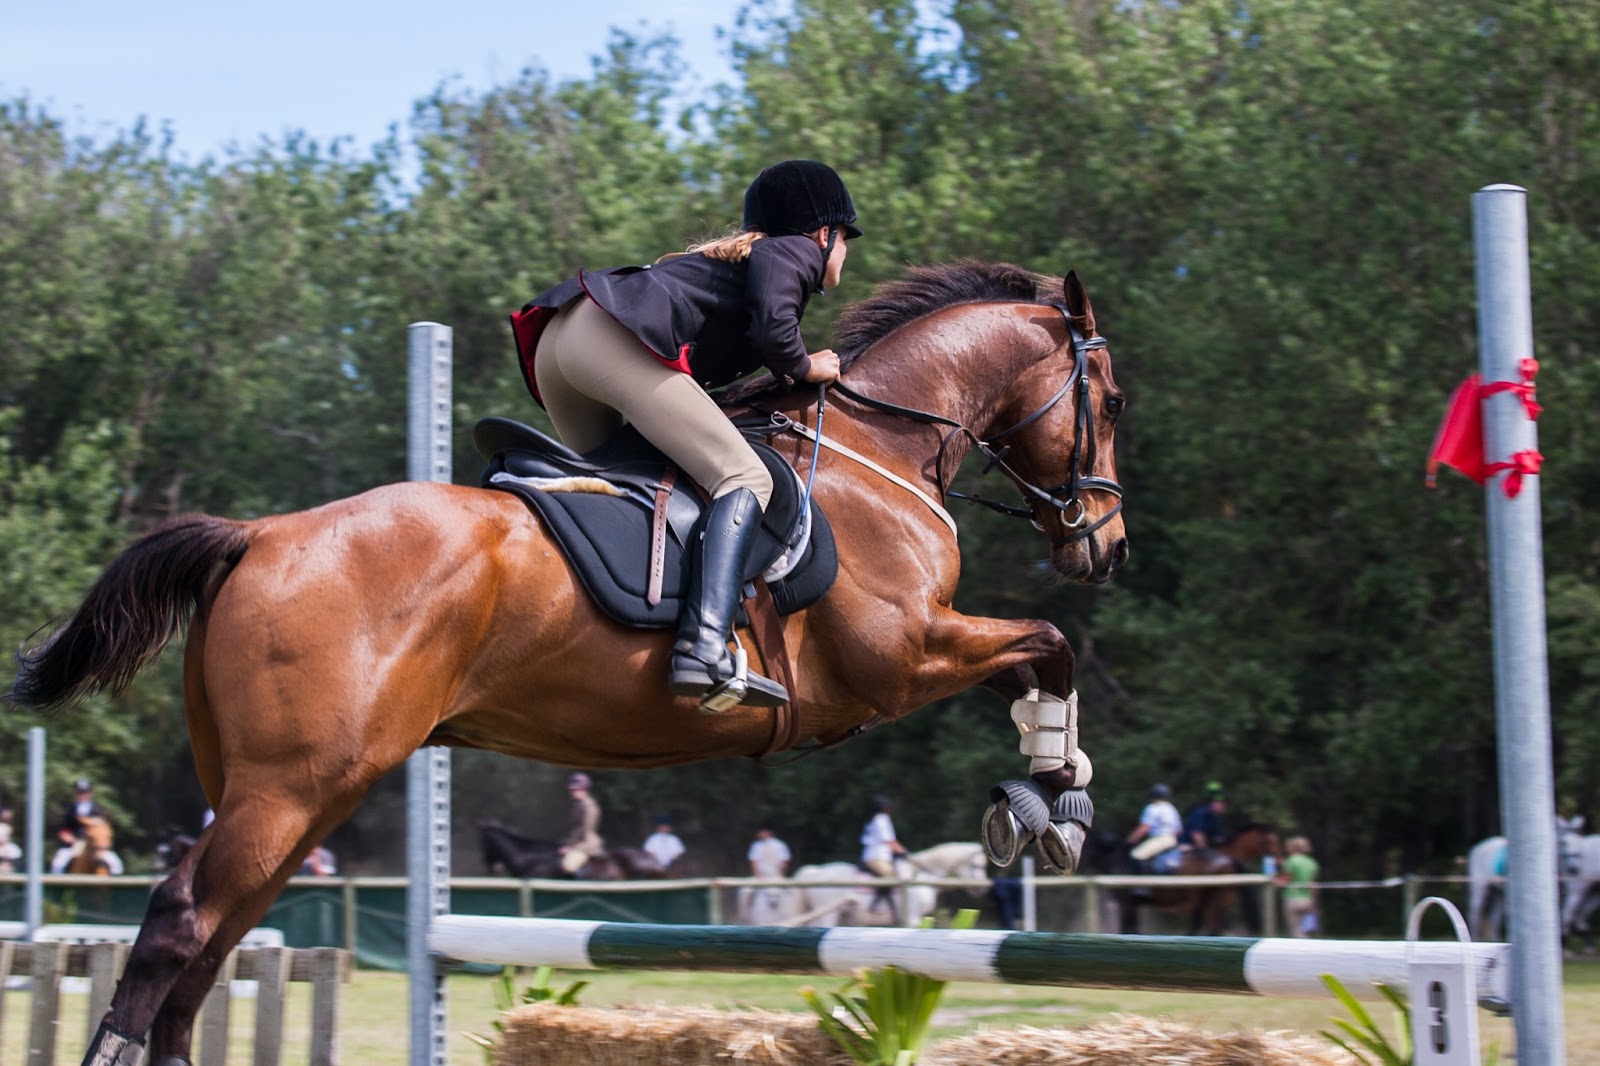 a rider whose heel has come up and lower leg slid back while jumping